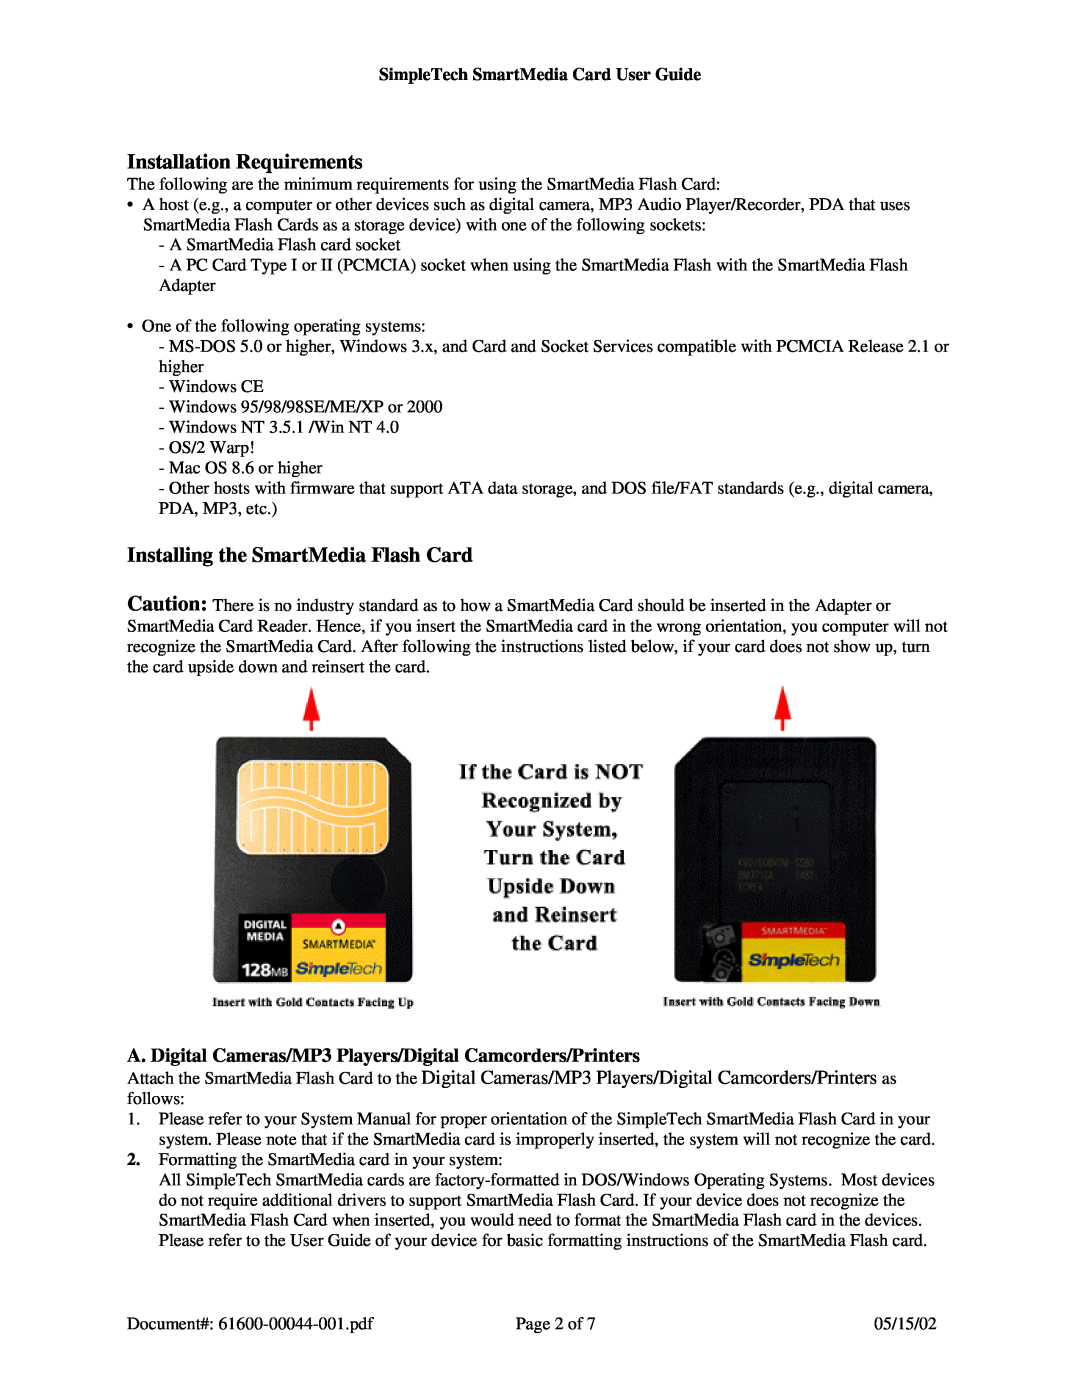 SimpleTech SmartMedia (SM) Card/Adapter specifications Installation Requirements, Installing the SmartMedia Flash Card 